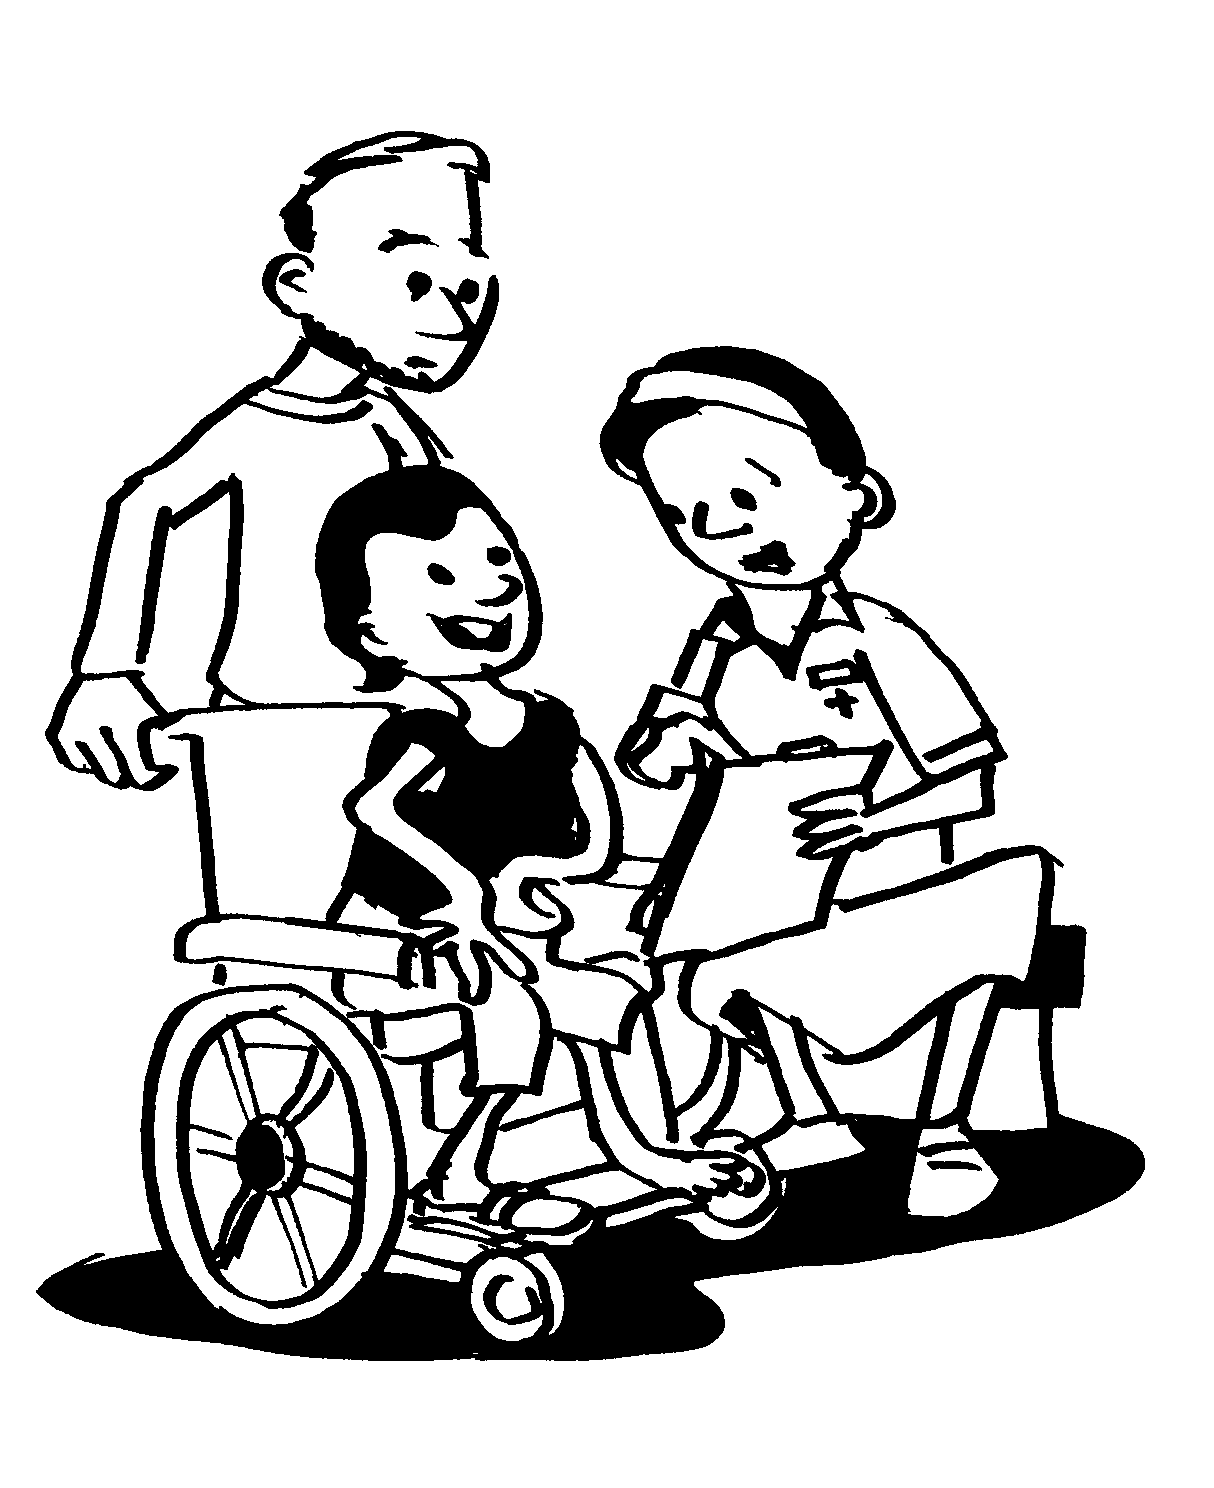 A nurse explain directly to the person with disability the result of a medical check